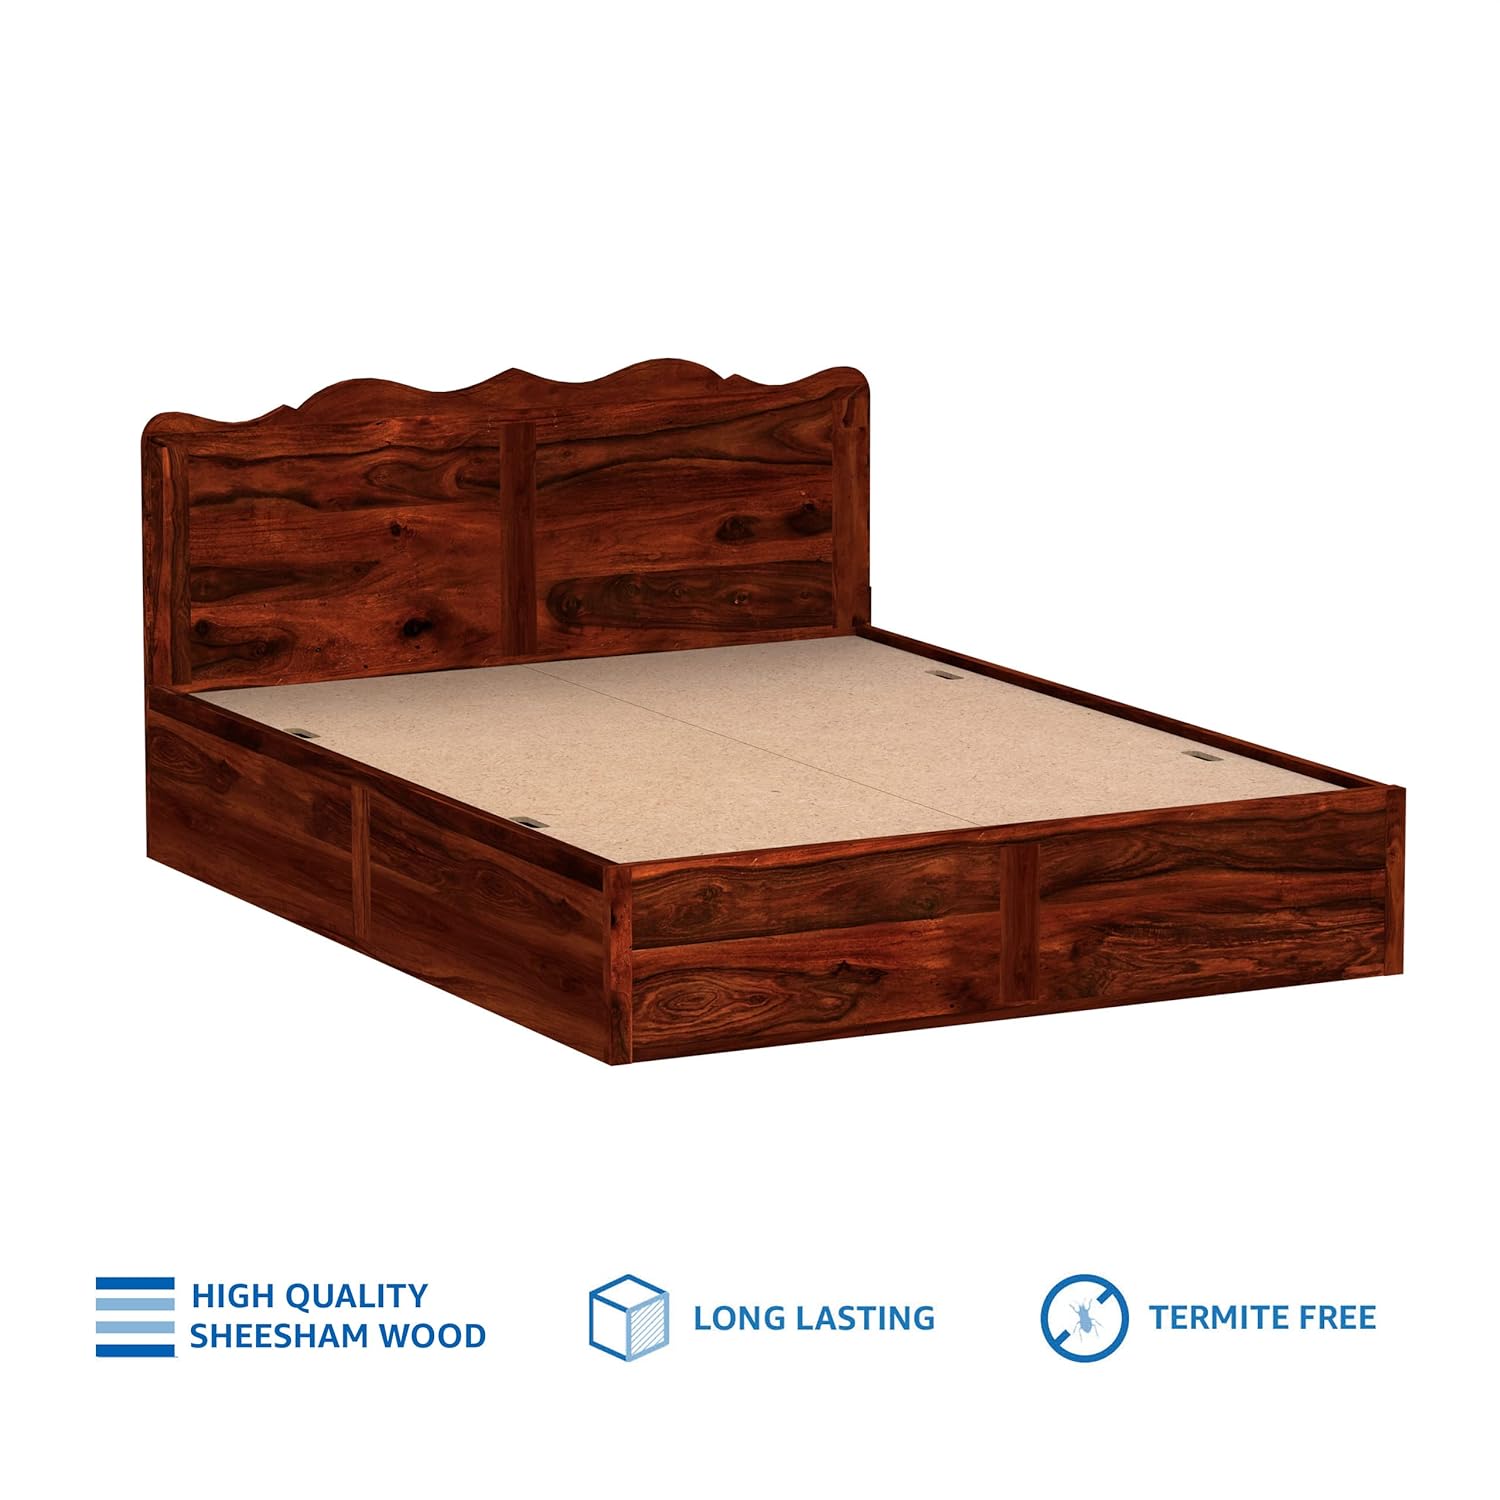 Solid Sheesham Wood Mehraab Queen Size Bed with Box Storage